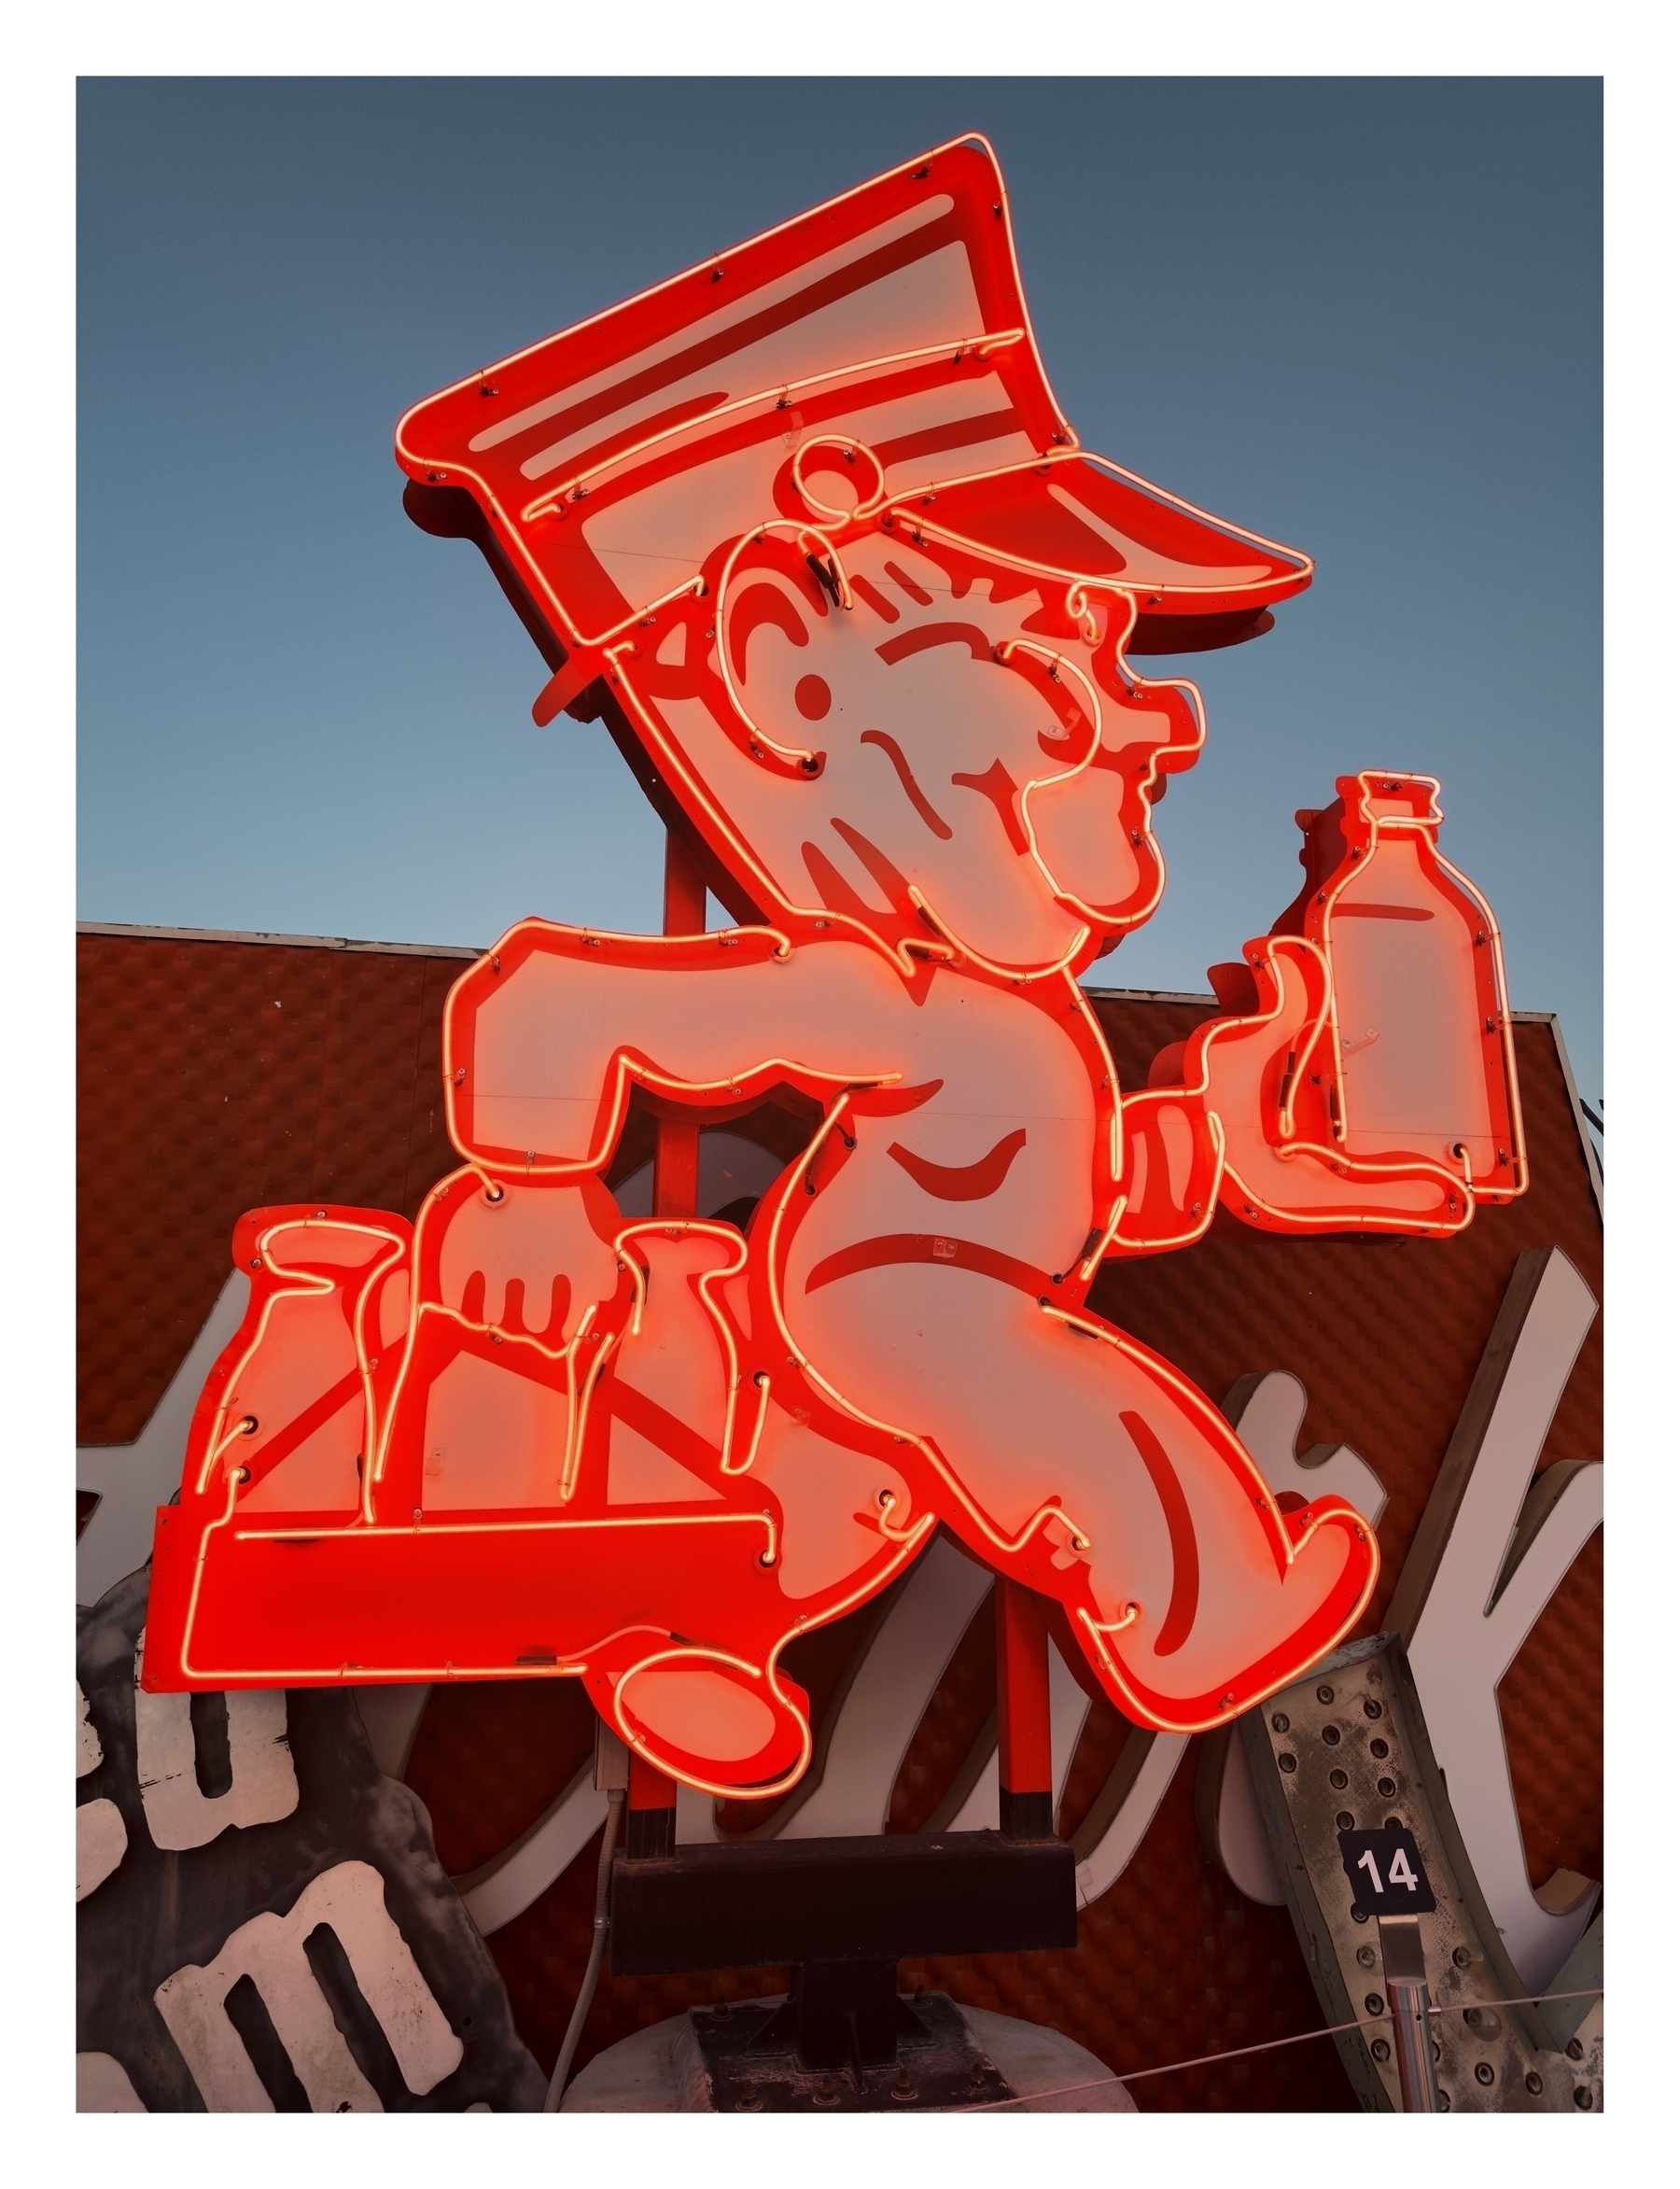 Red neon sign depicting a cartoon figure in a running pose, carrying a bottle, against a clear sky; mounted on a metal structure.